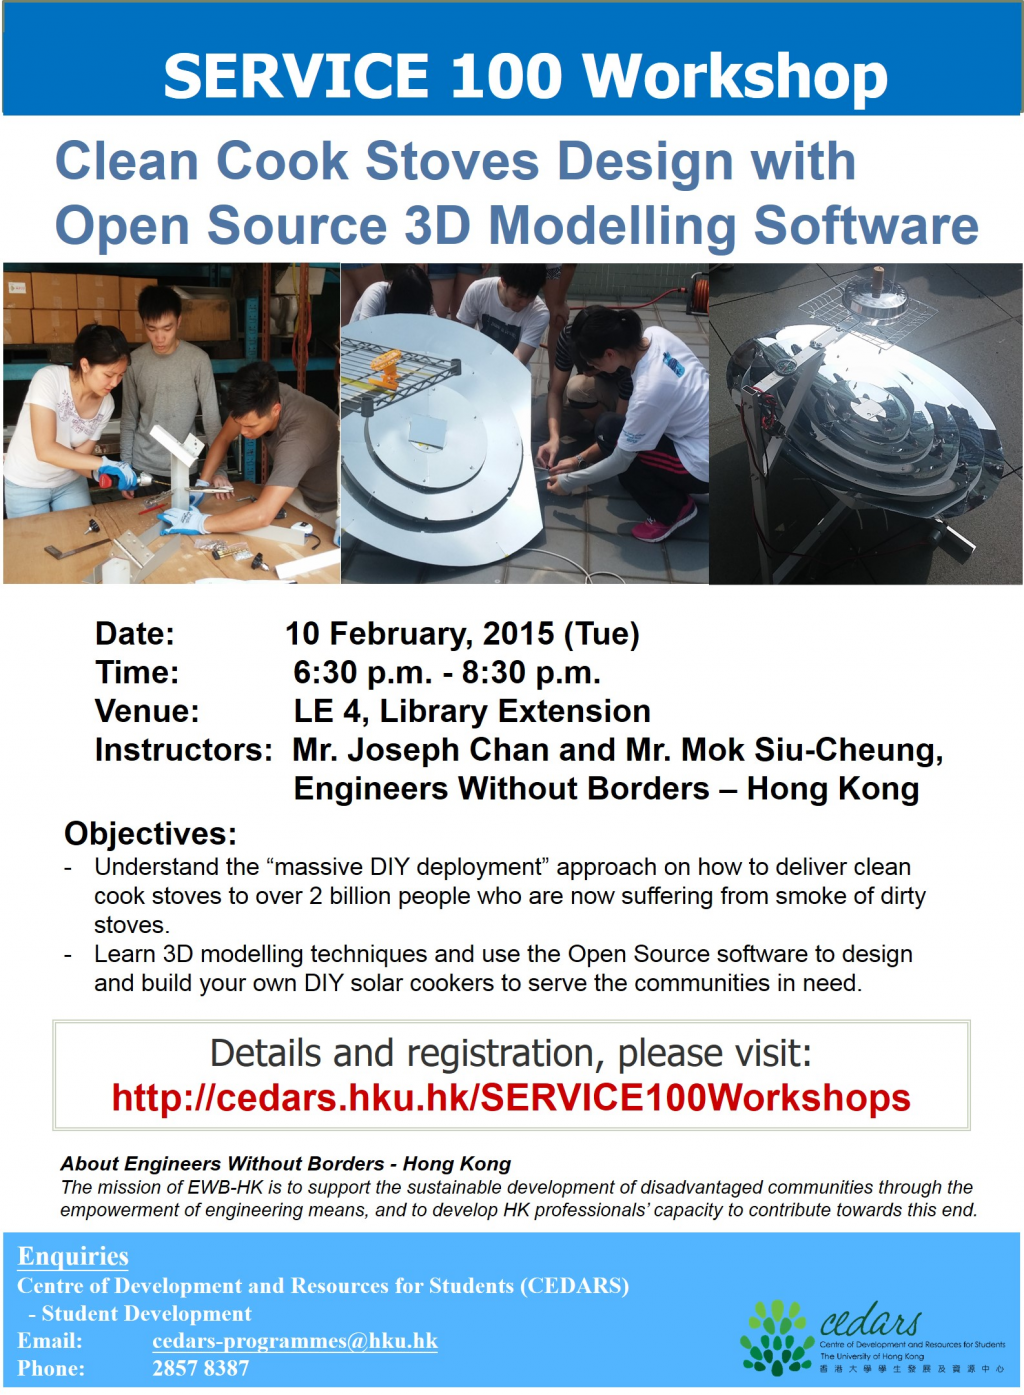 SERVICE 100 Workshop: Clean Cook Stoves Design with Open Source 3D Modelling Software